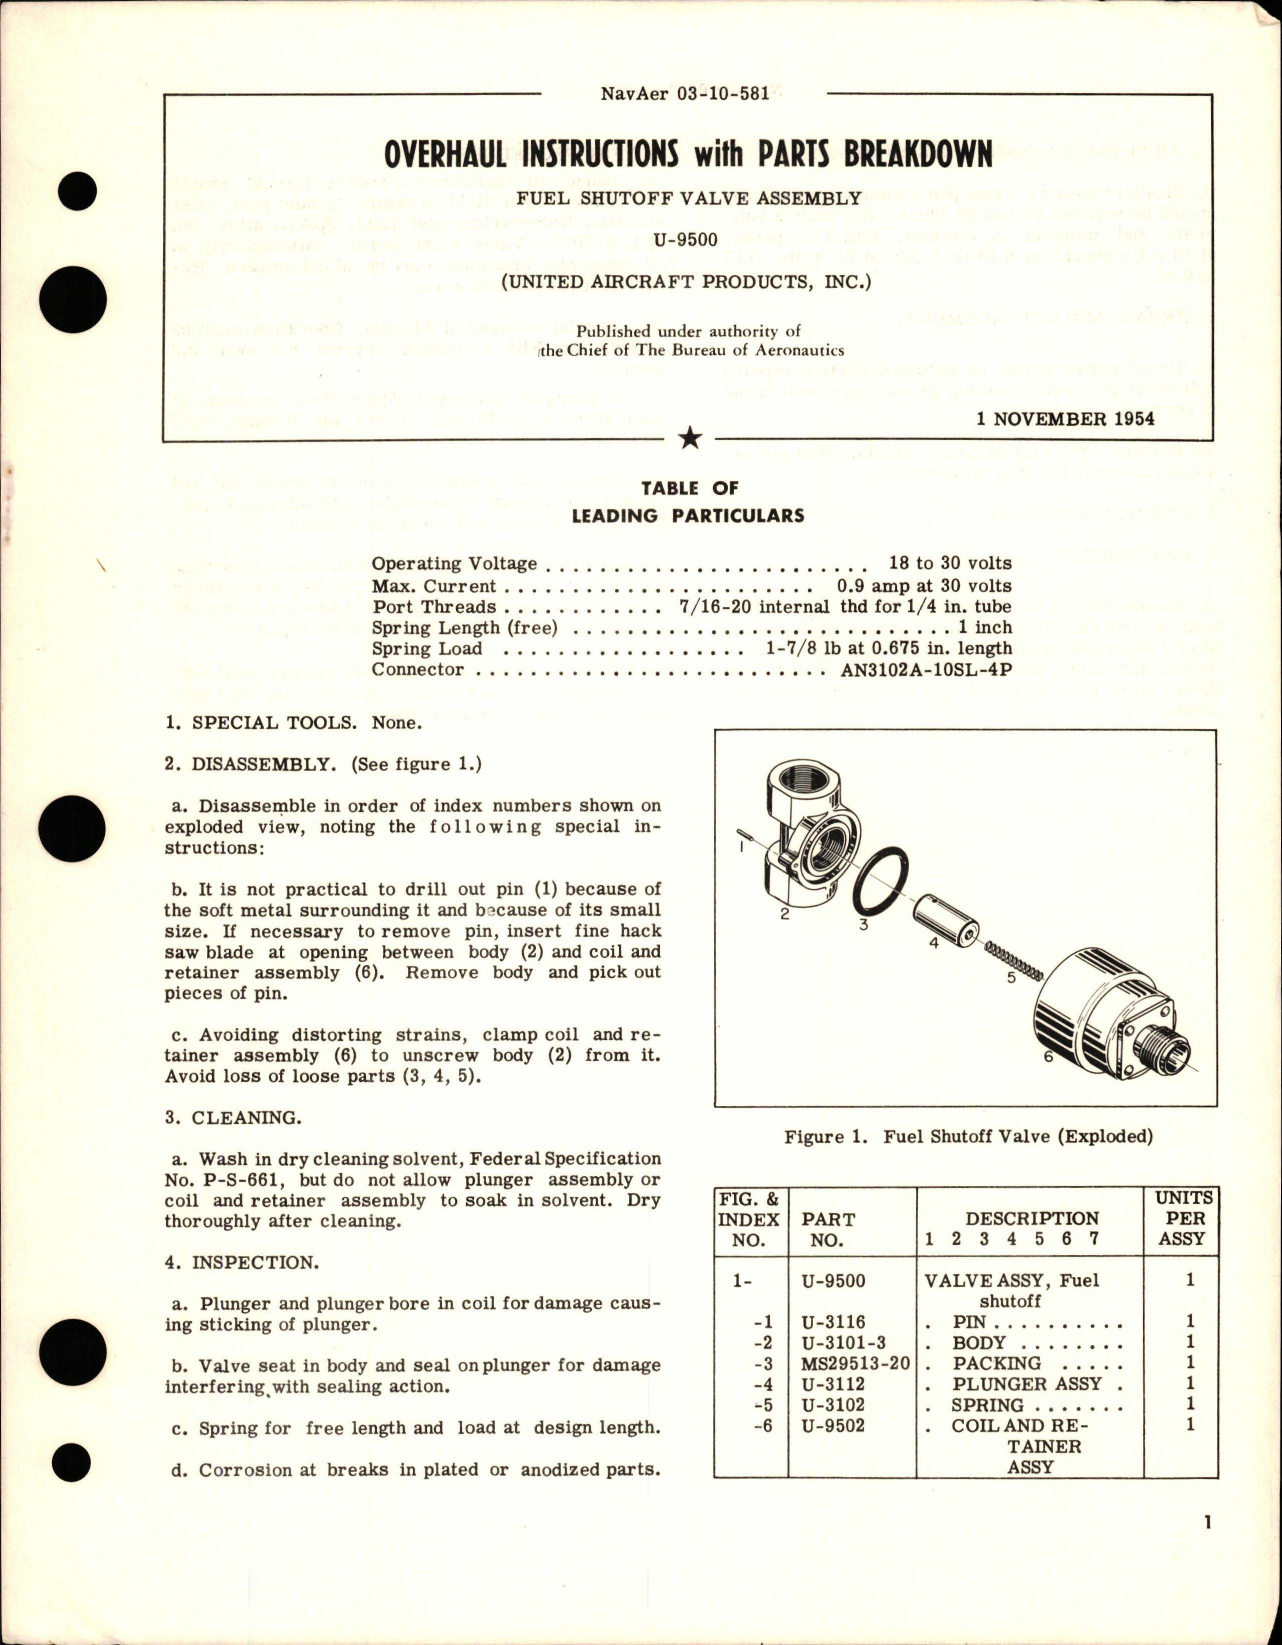 Sample page 1 from AirCorps Library document: Overhaul Instructions with Parts Breakdown for Fuel Shutoff Valve Assembly - U-9500